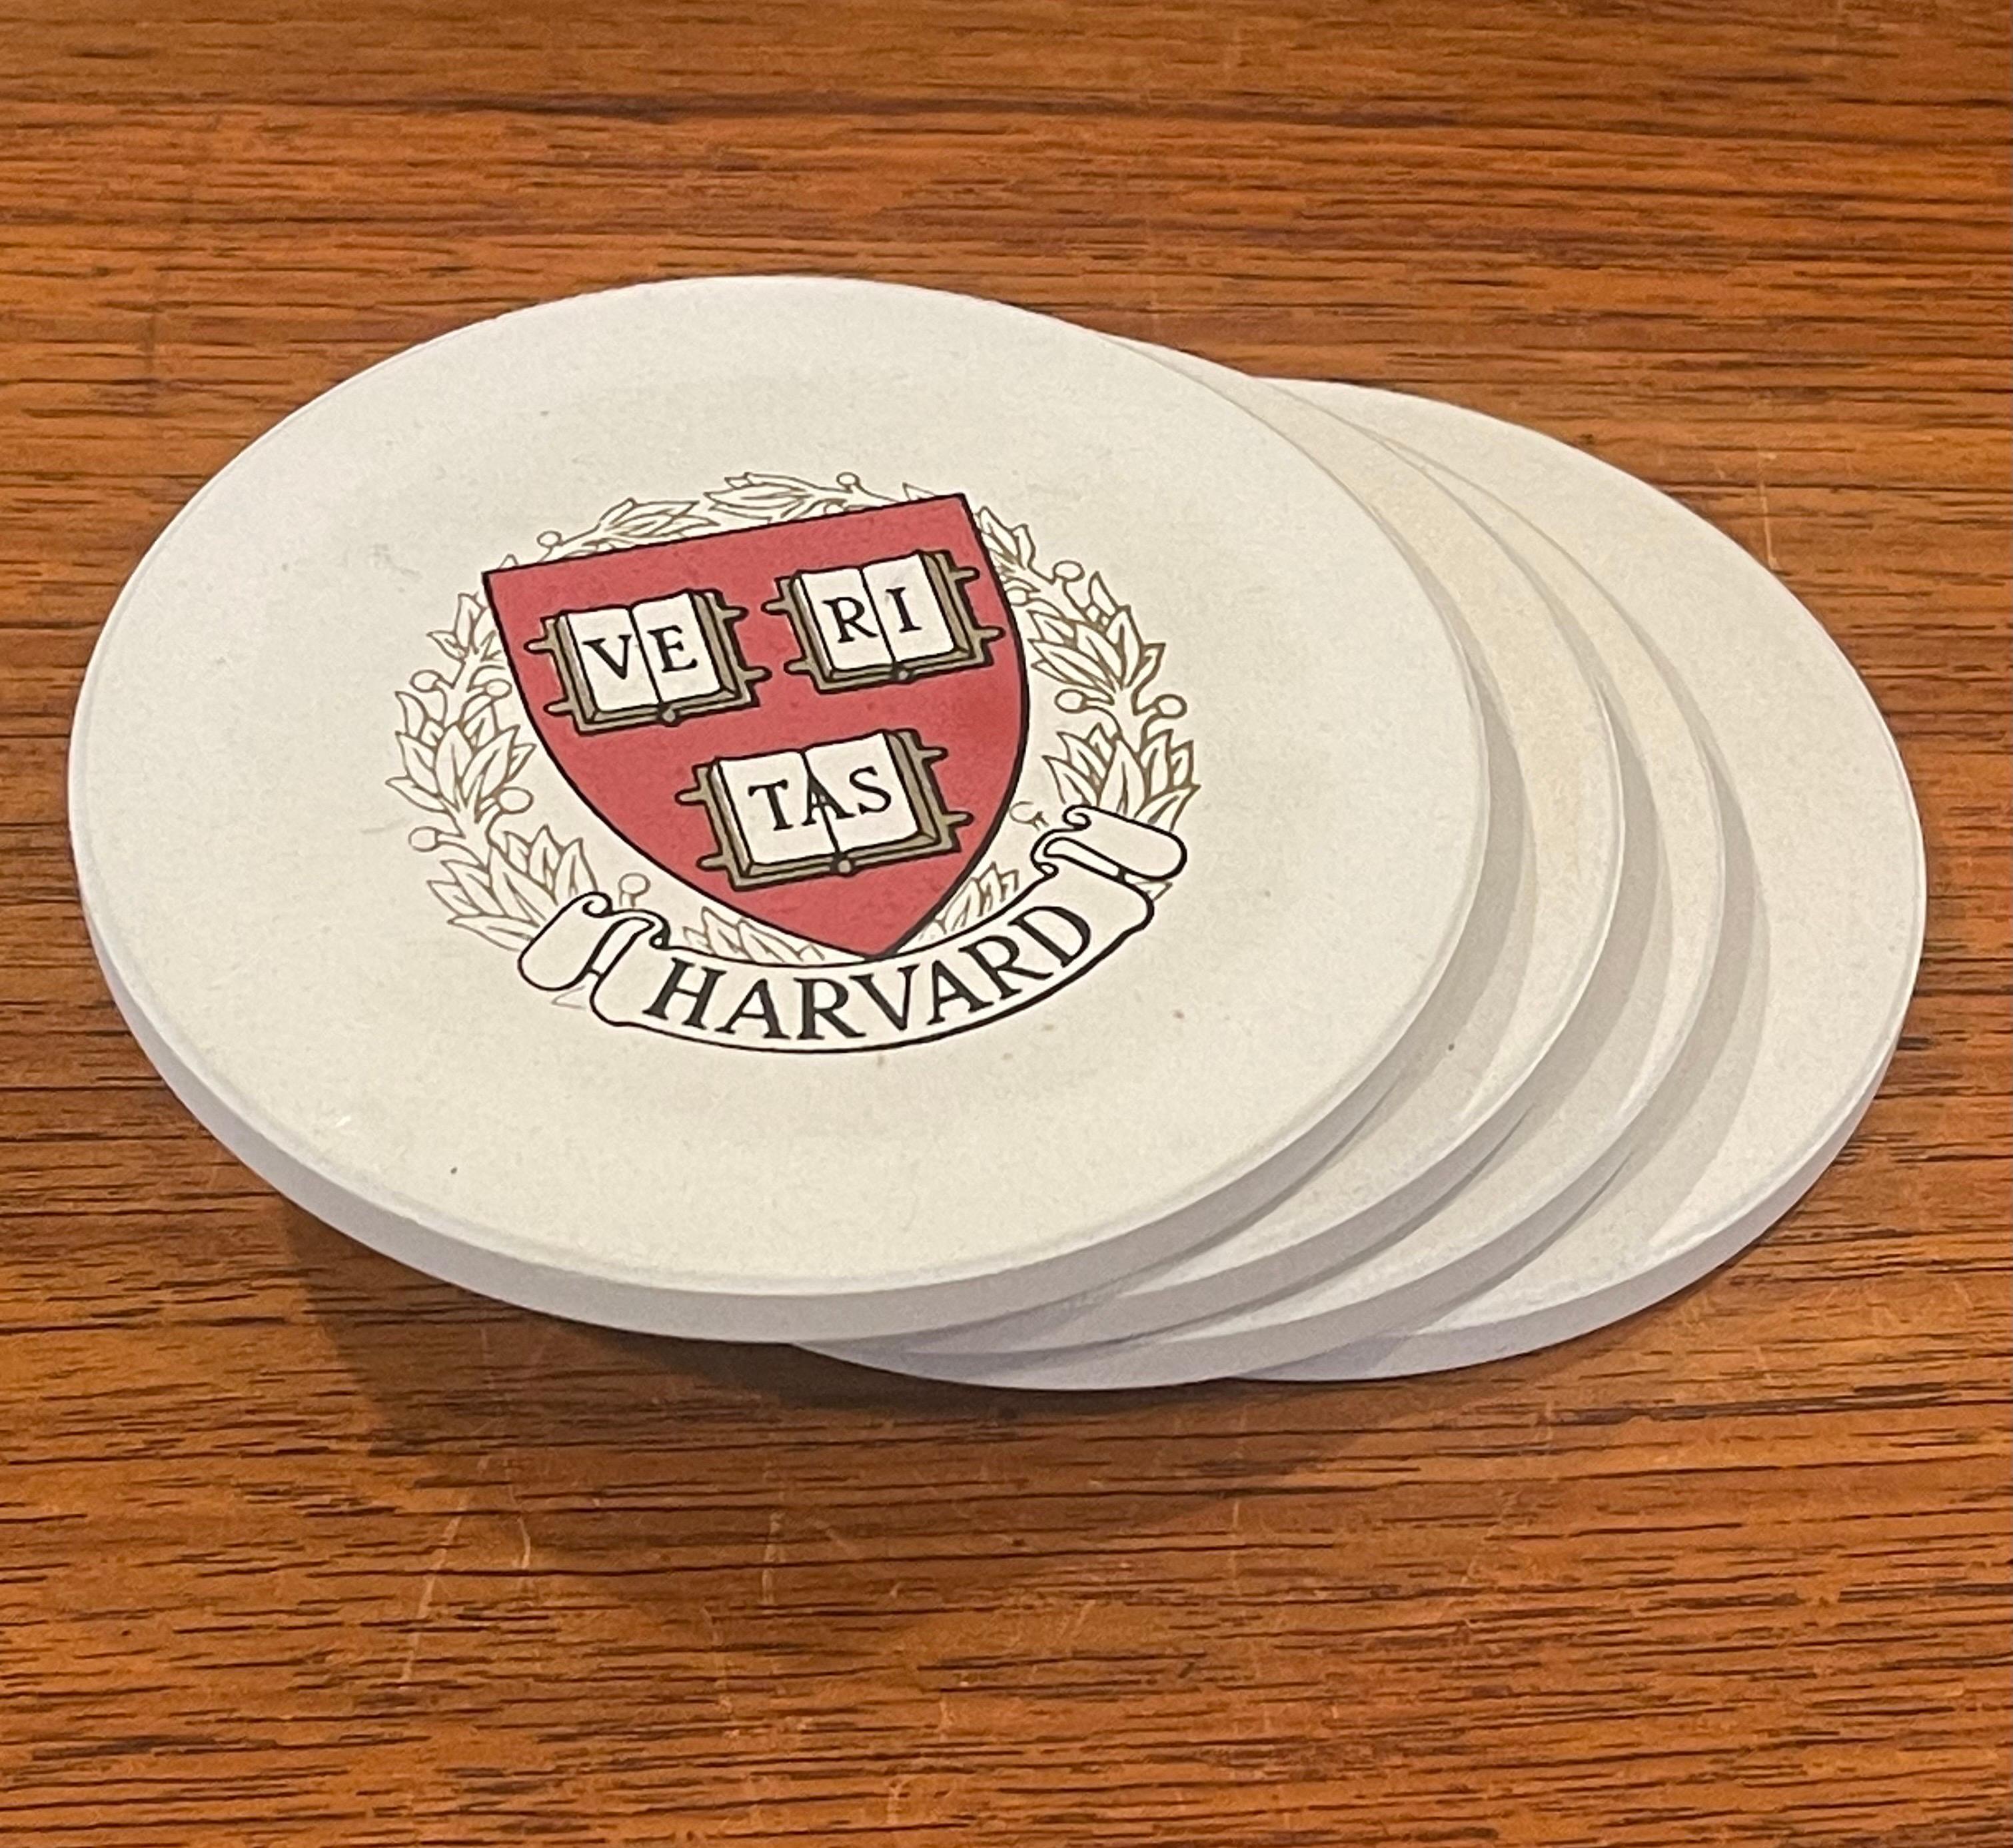 Vintage box set of four Harvard University stone drink coasters by Coaster Stone, circa 1980s. The set comes with the original box and includes four round cream colored stone coasters with the Harvard University seal; the coasters are 4.25